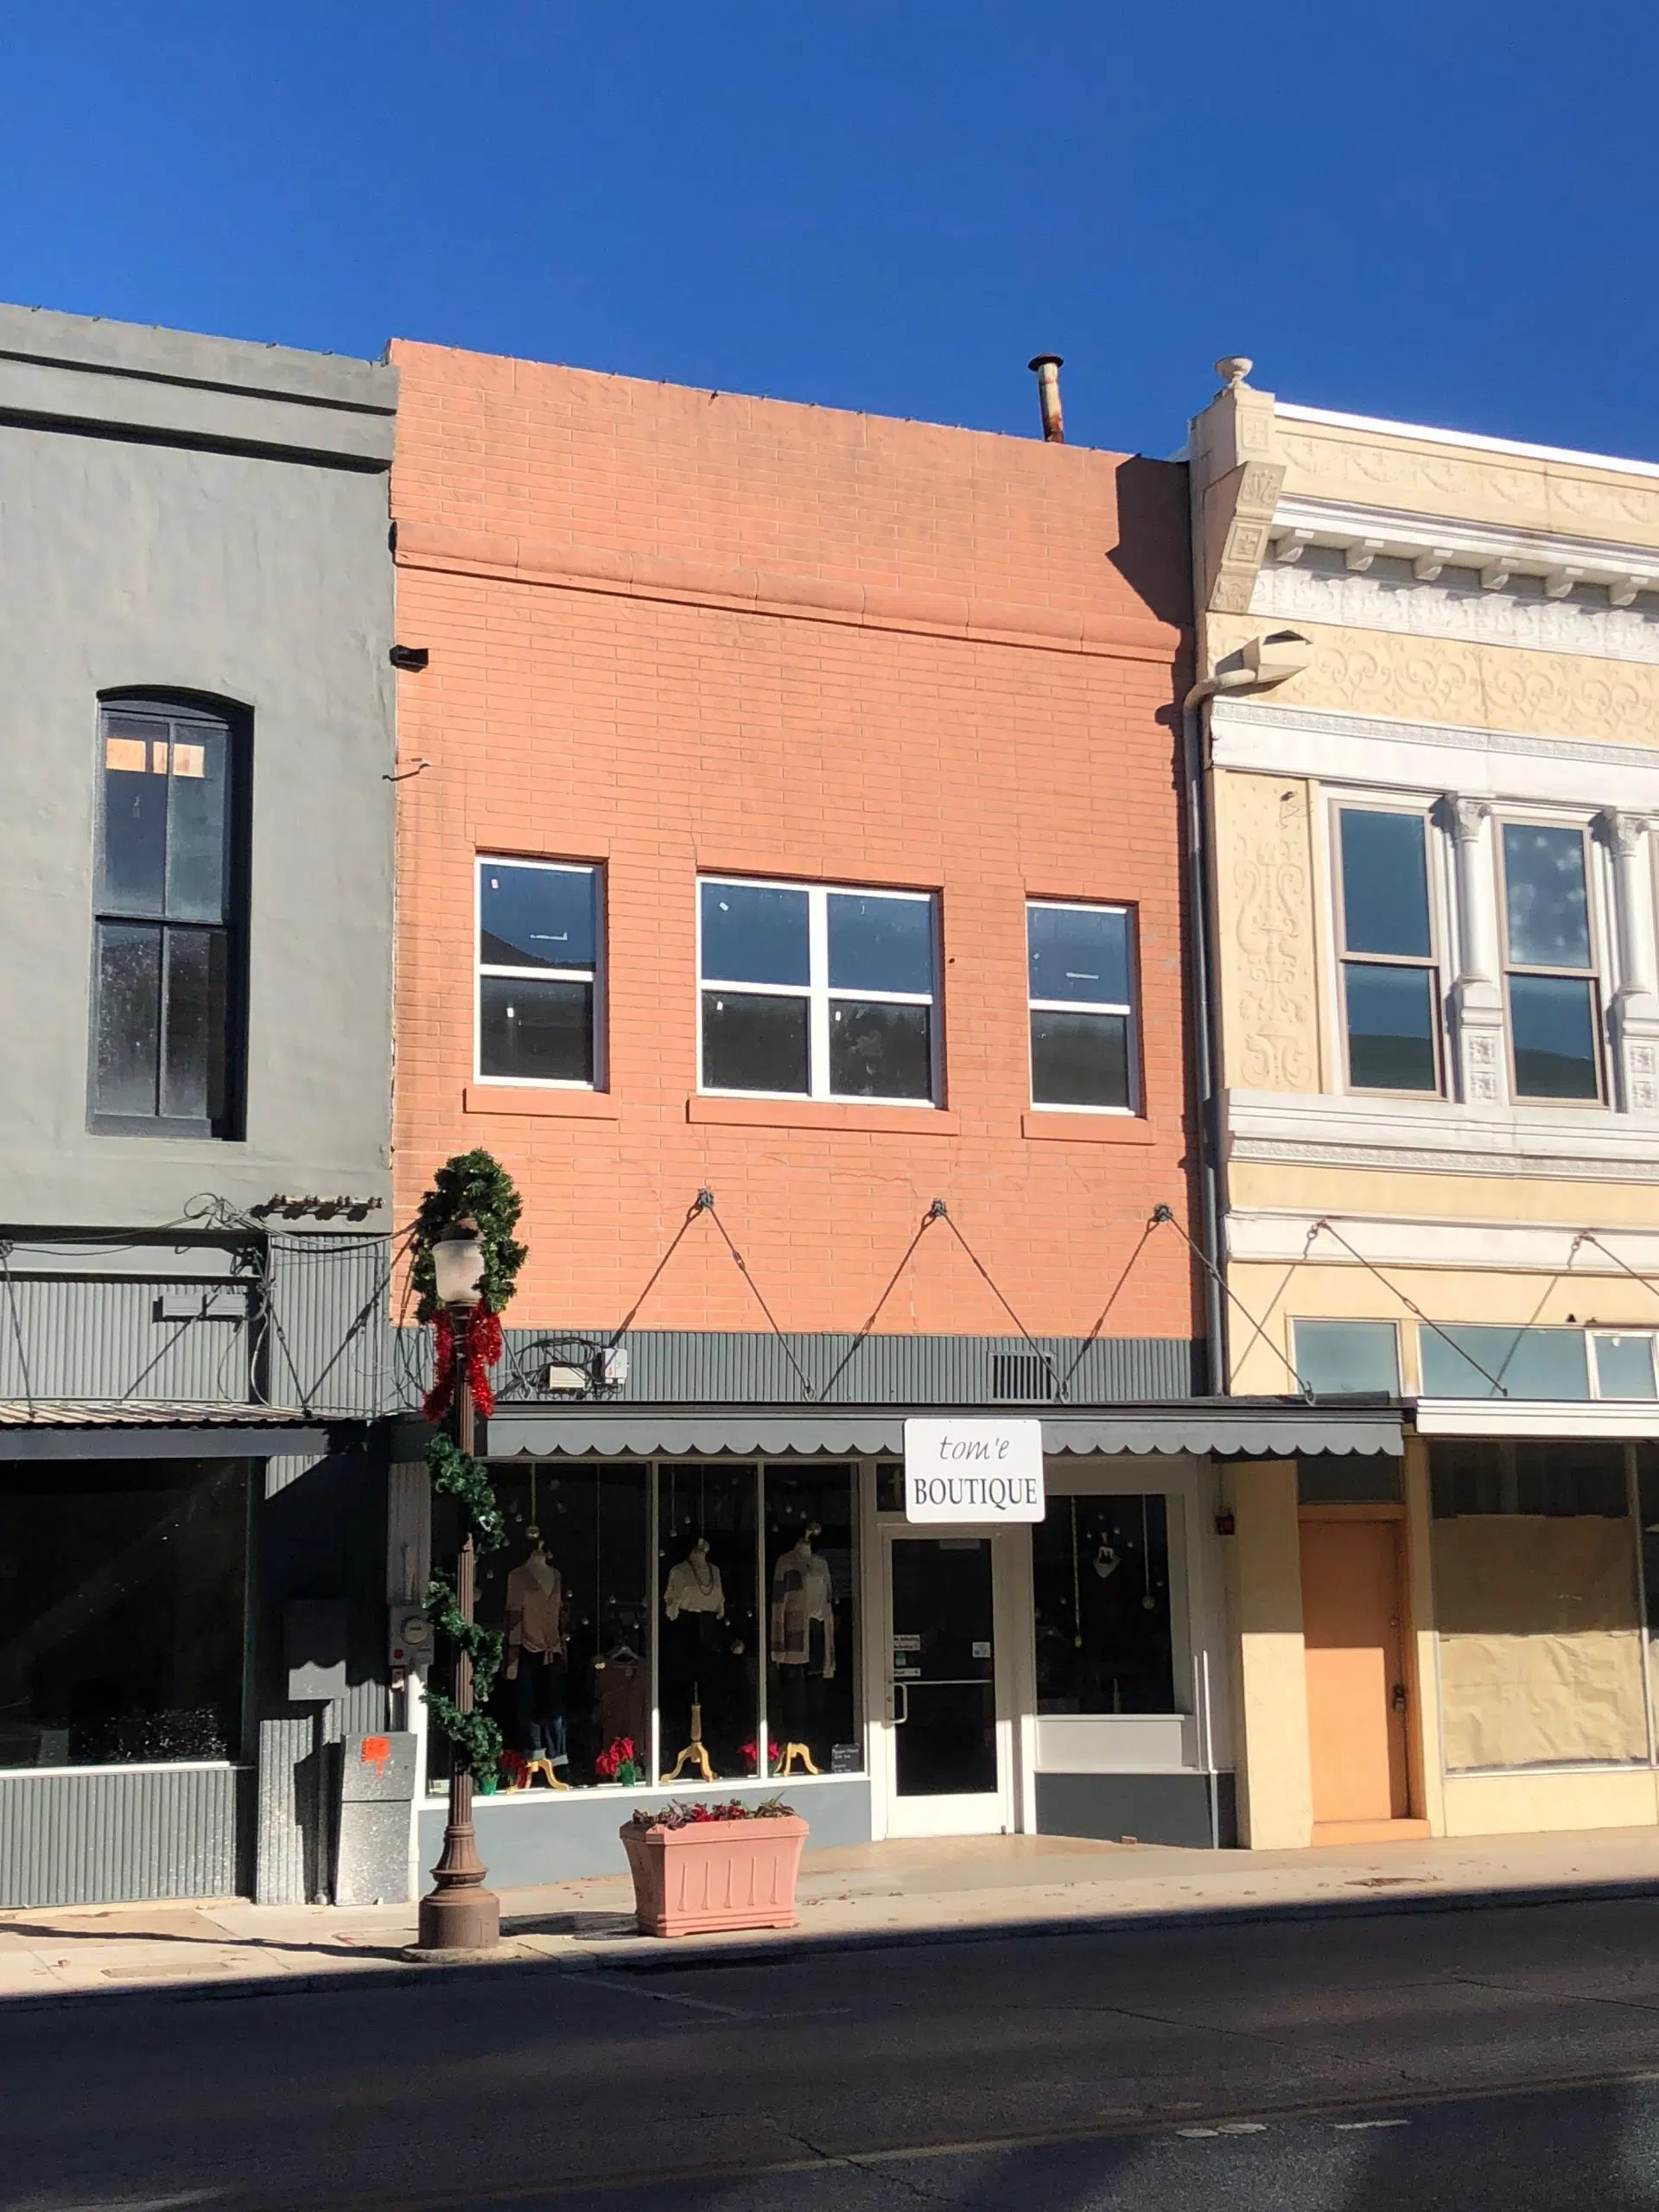 Downtown businesses to get a facelift